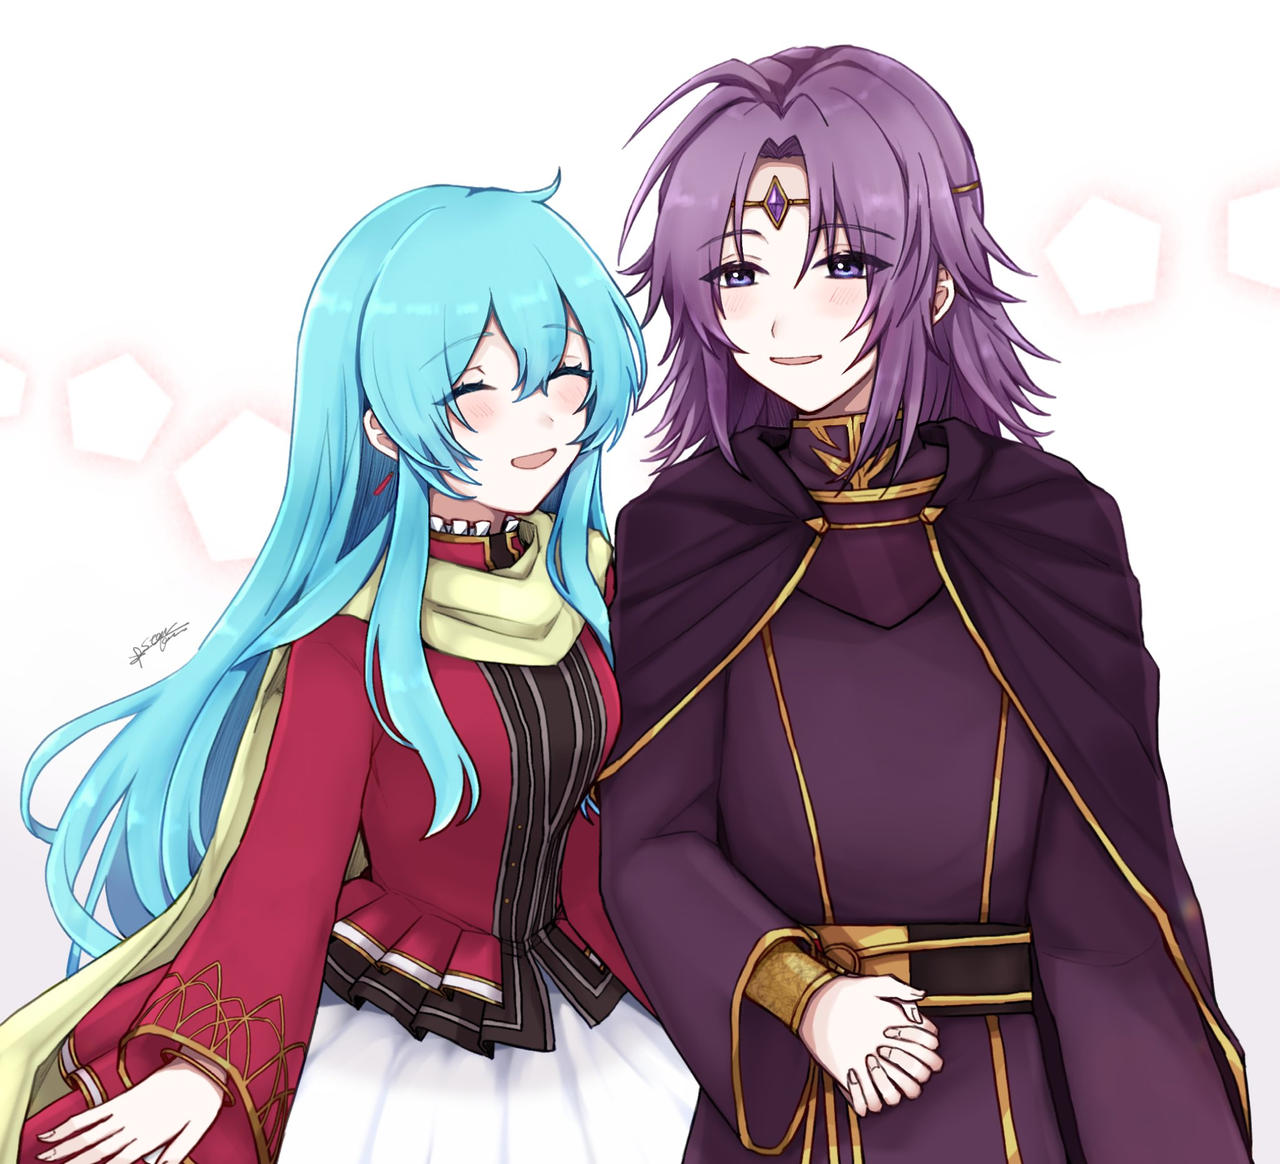 Erika and Lyon from Fire Emblem by Charizard776 on DeviantArt